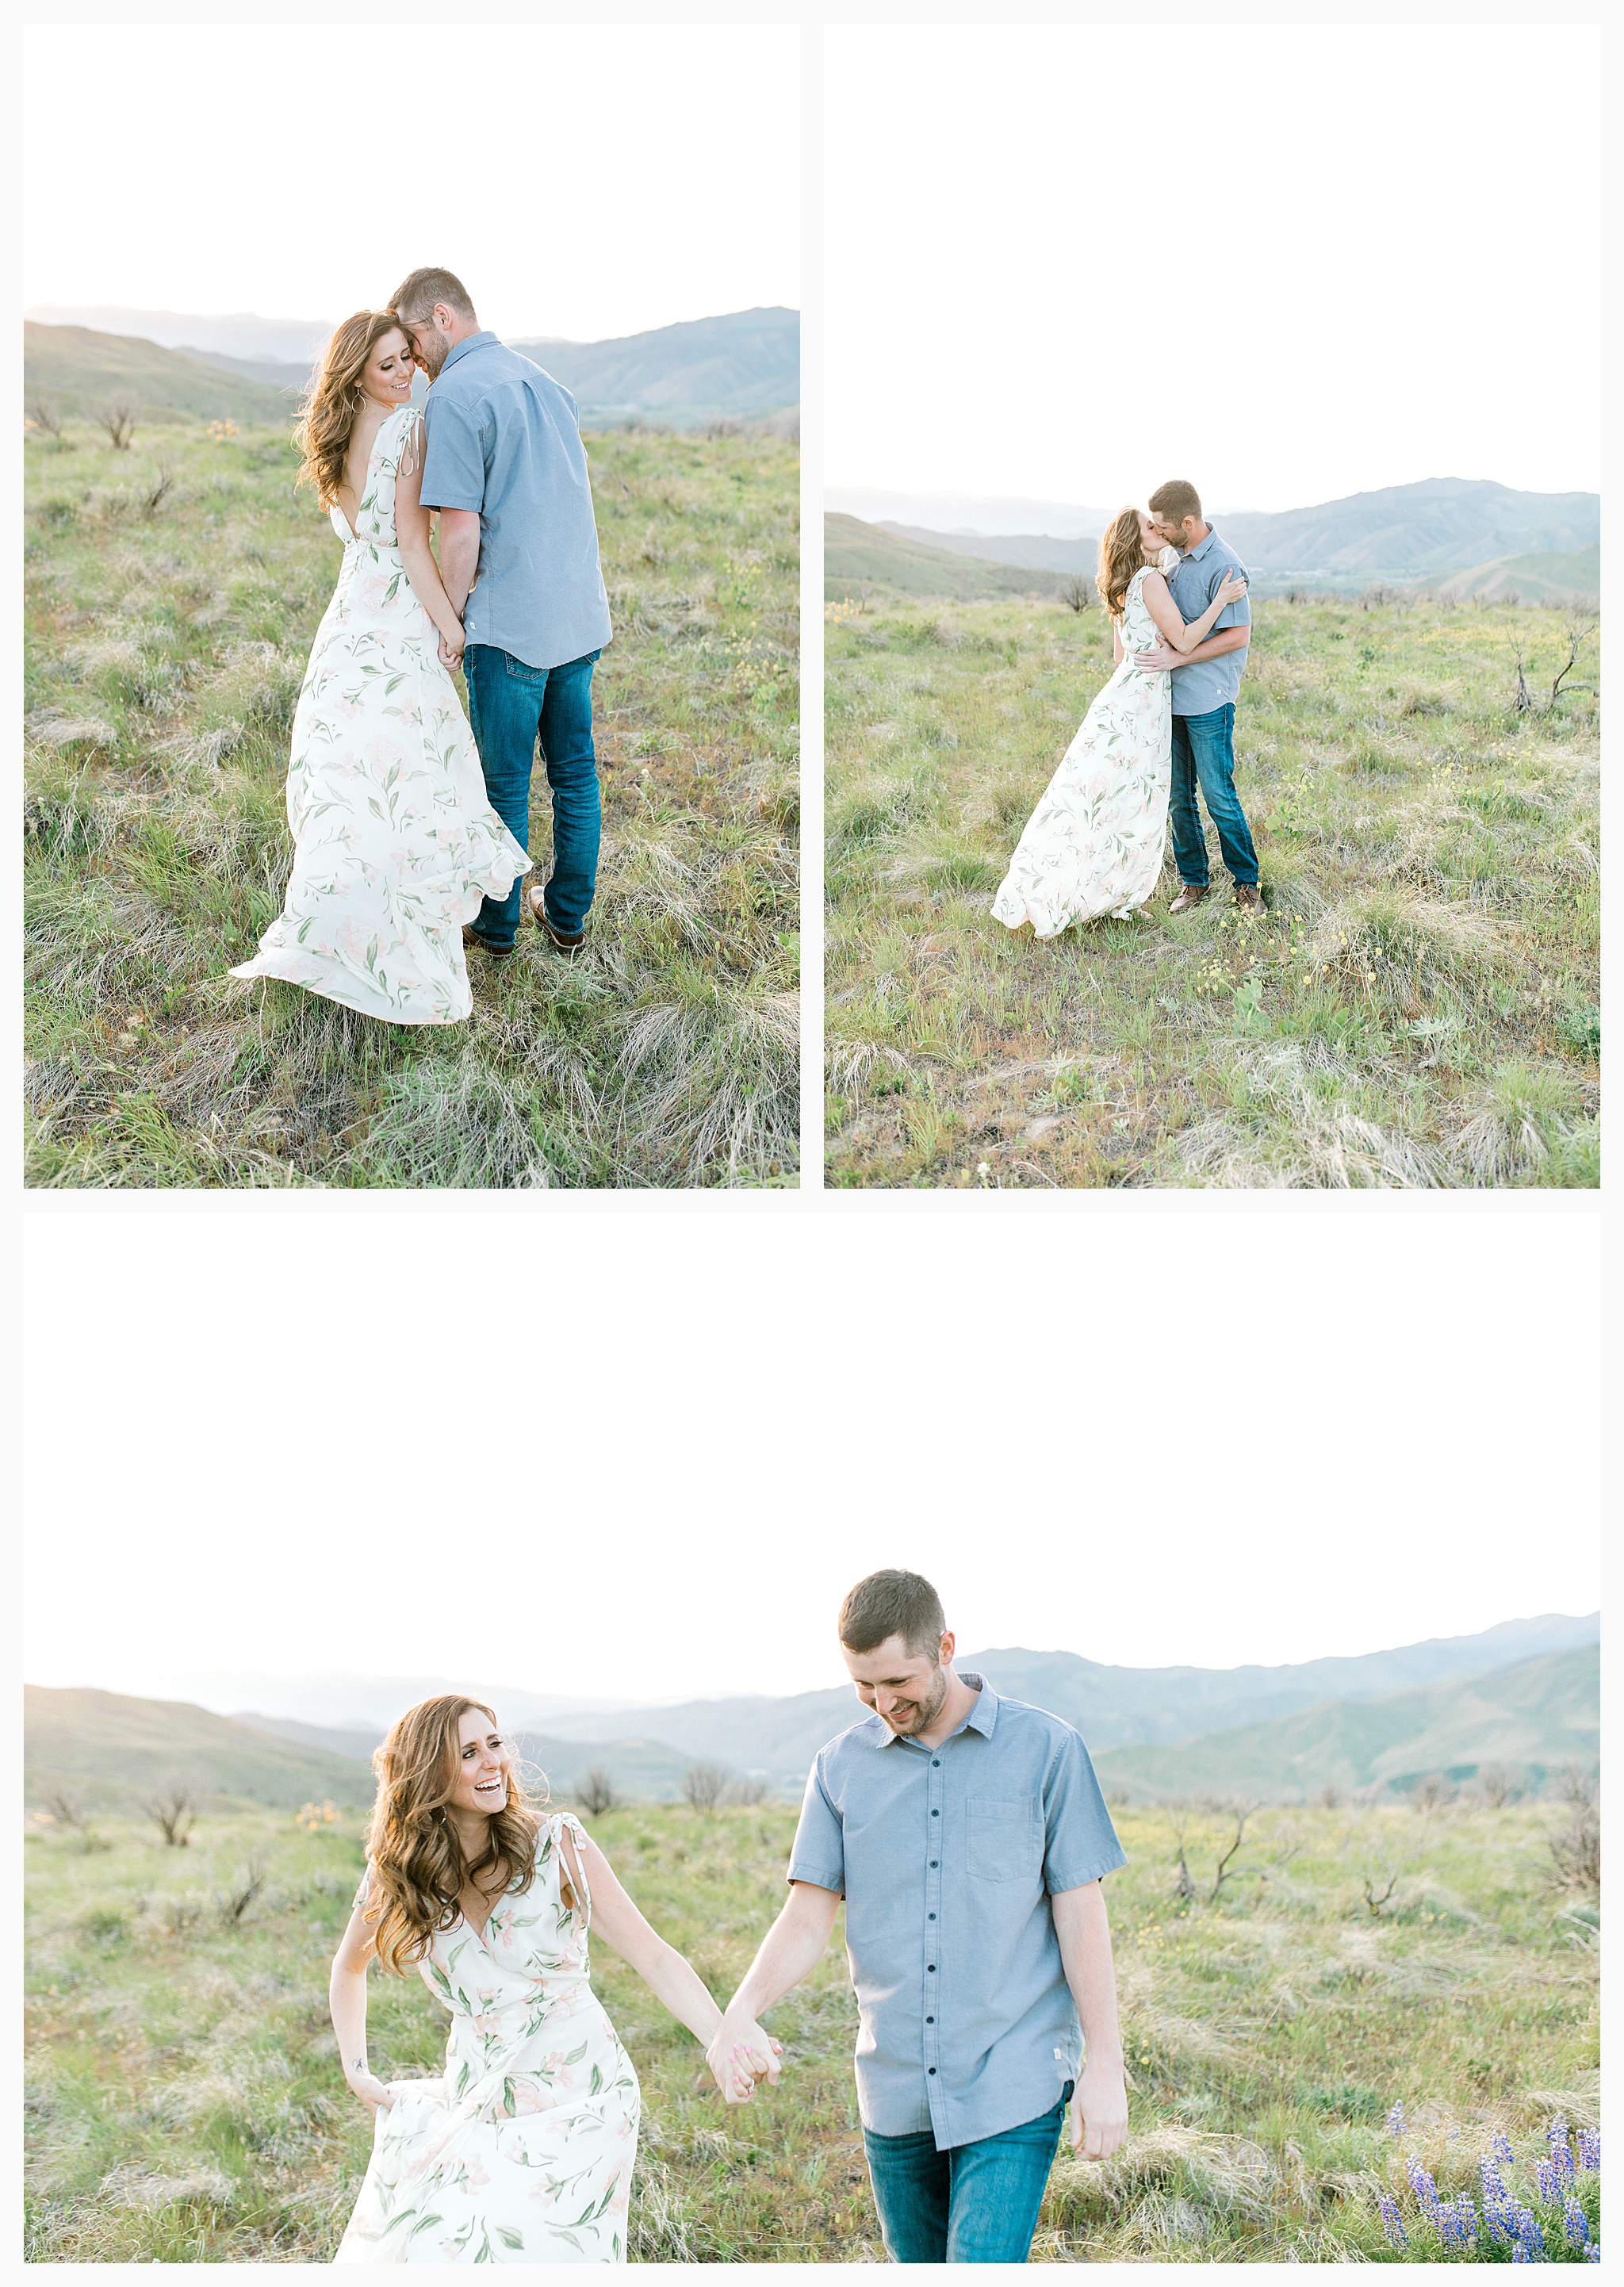 Engagement session amongst the wildflowers in Wenatchee, Washington | Engagement Session Outfit Inspiration for Wedding Photography with Emma Rose Company | Light and Airy PNW Photographer, Seattle Bride_0034.jpg